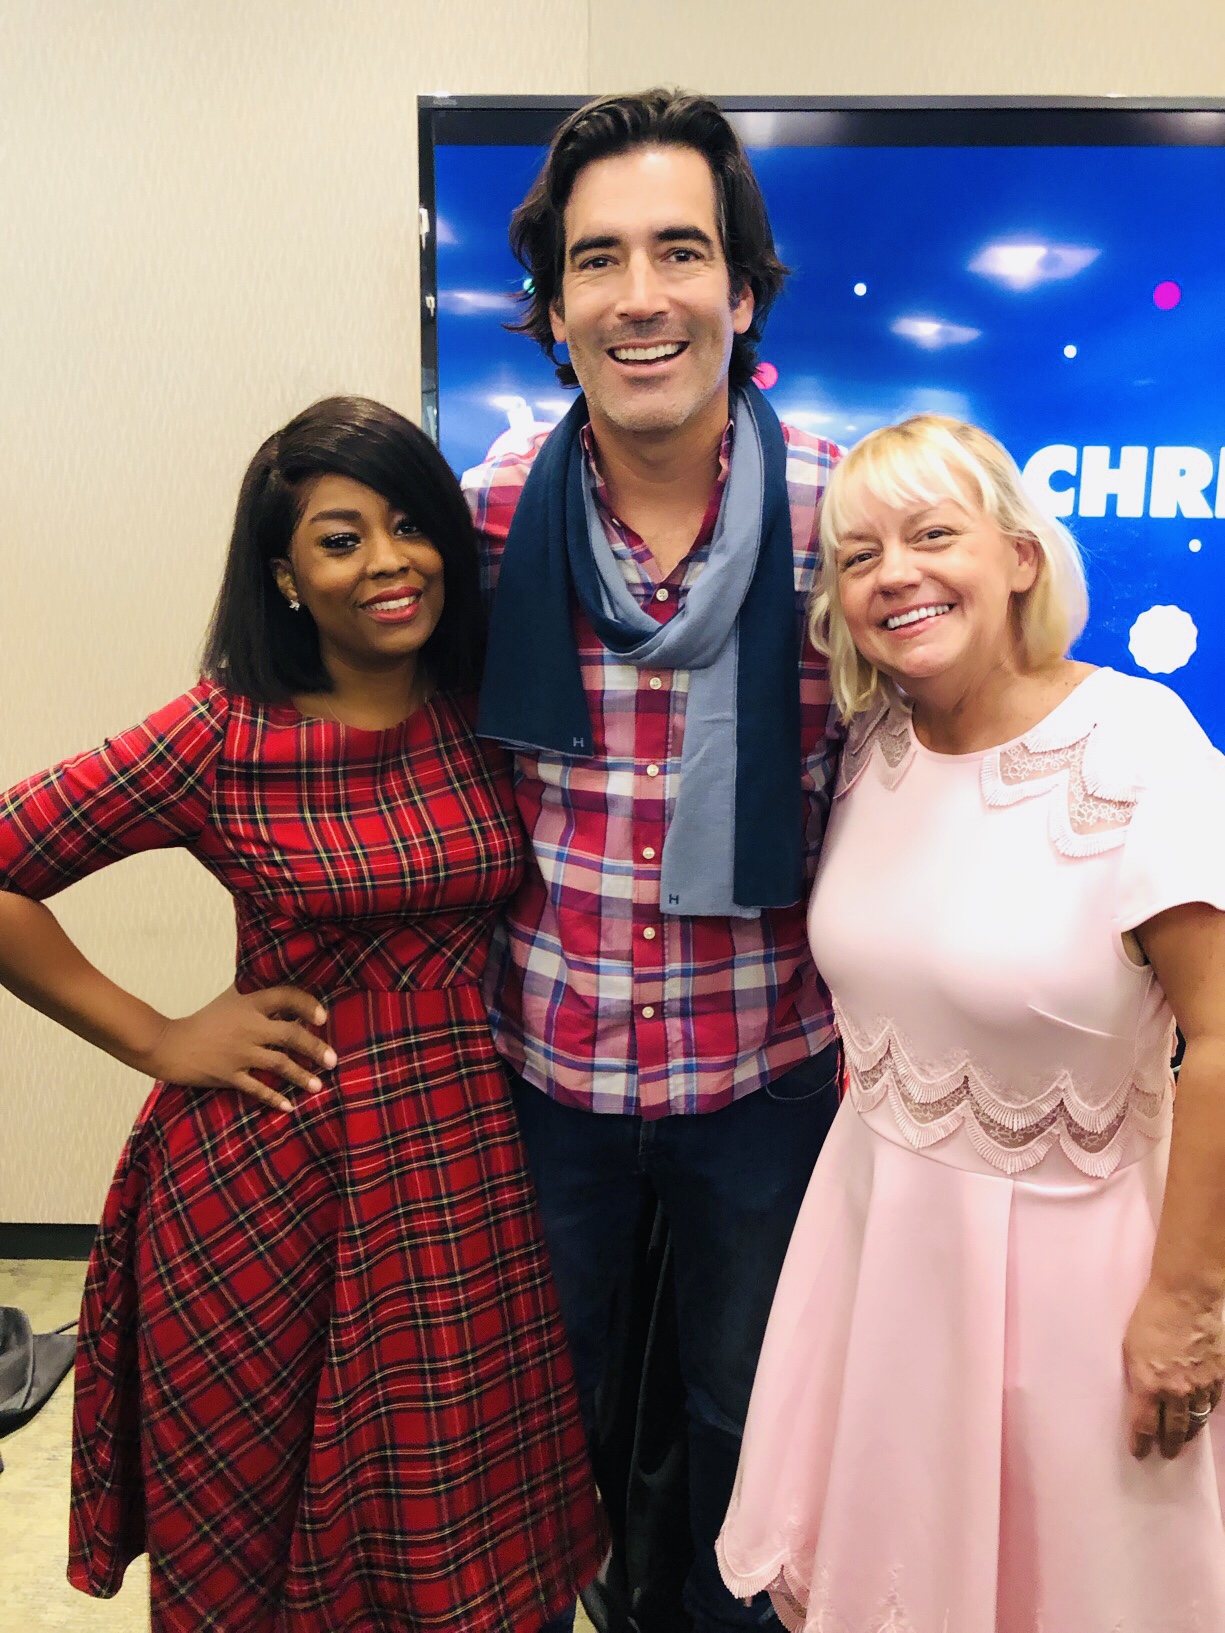 A Sit Down With Hosts Sherry Yard & Carter Oosterhouse From ABC’s 25 DAYS OF CHRISTMAS “The Great Christmas Light Fight” and “The Great American Baking Show: Holiday Edition”